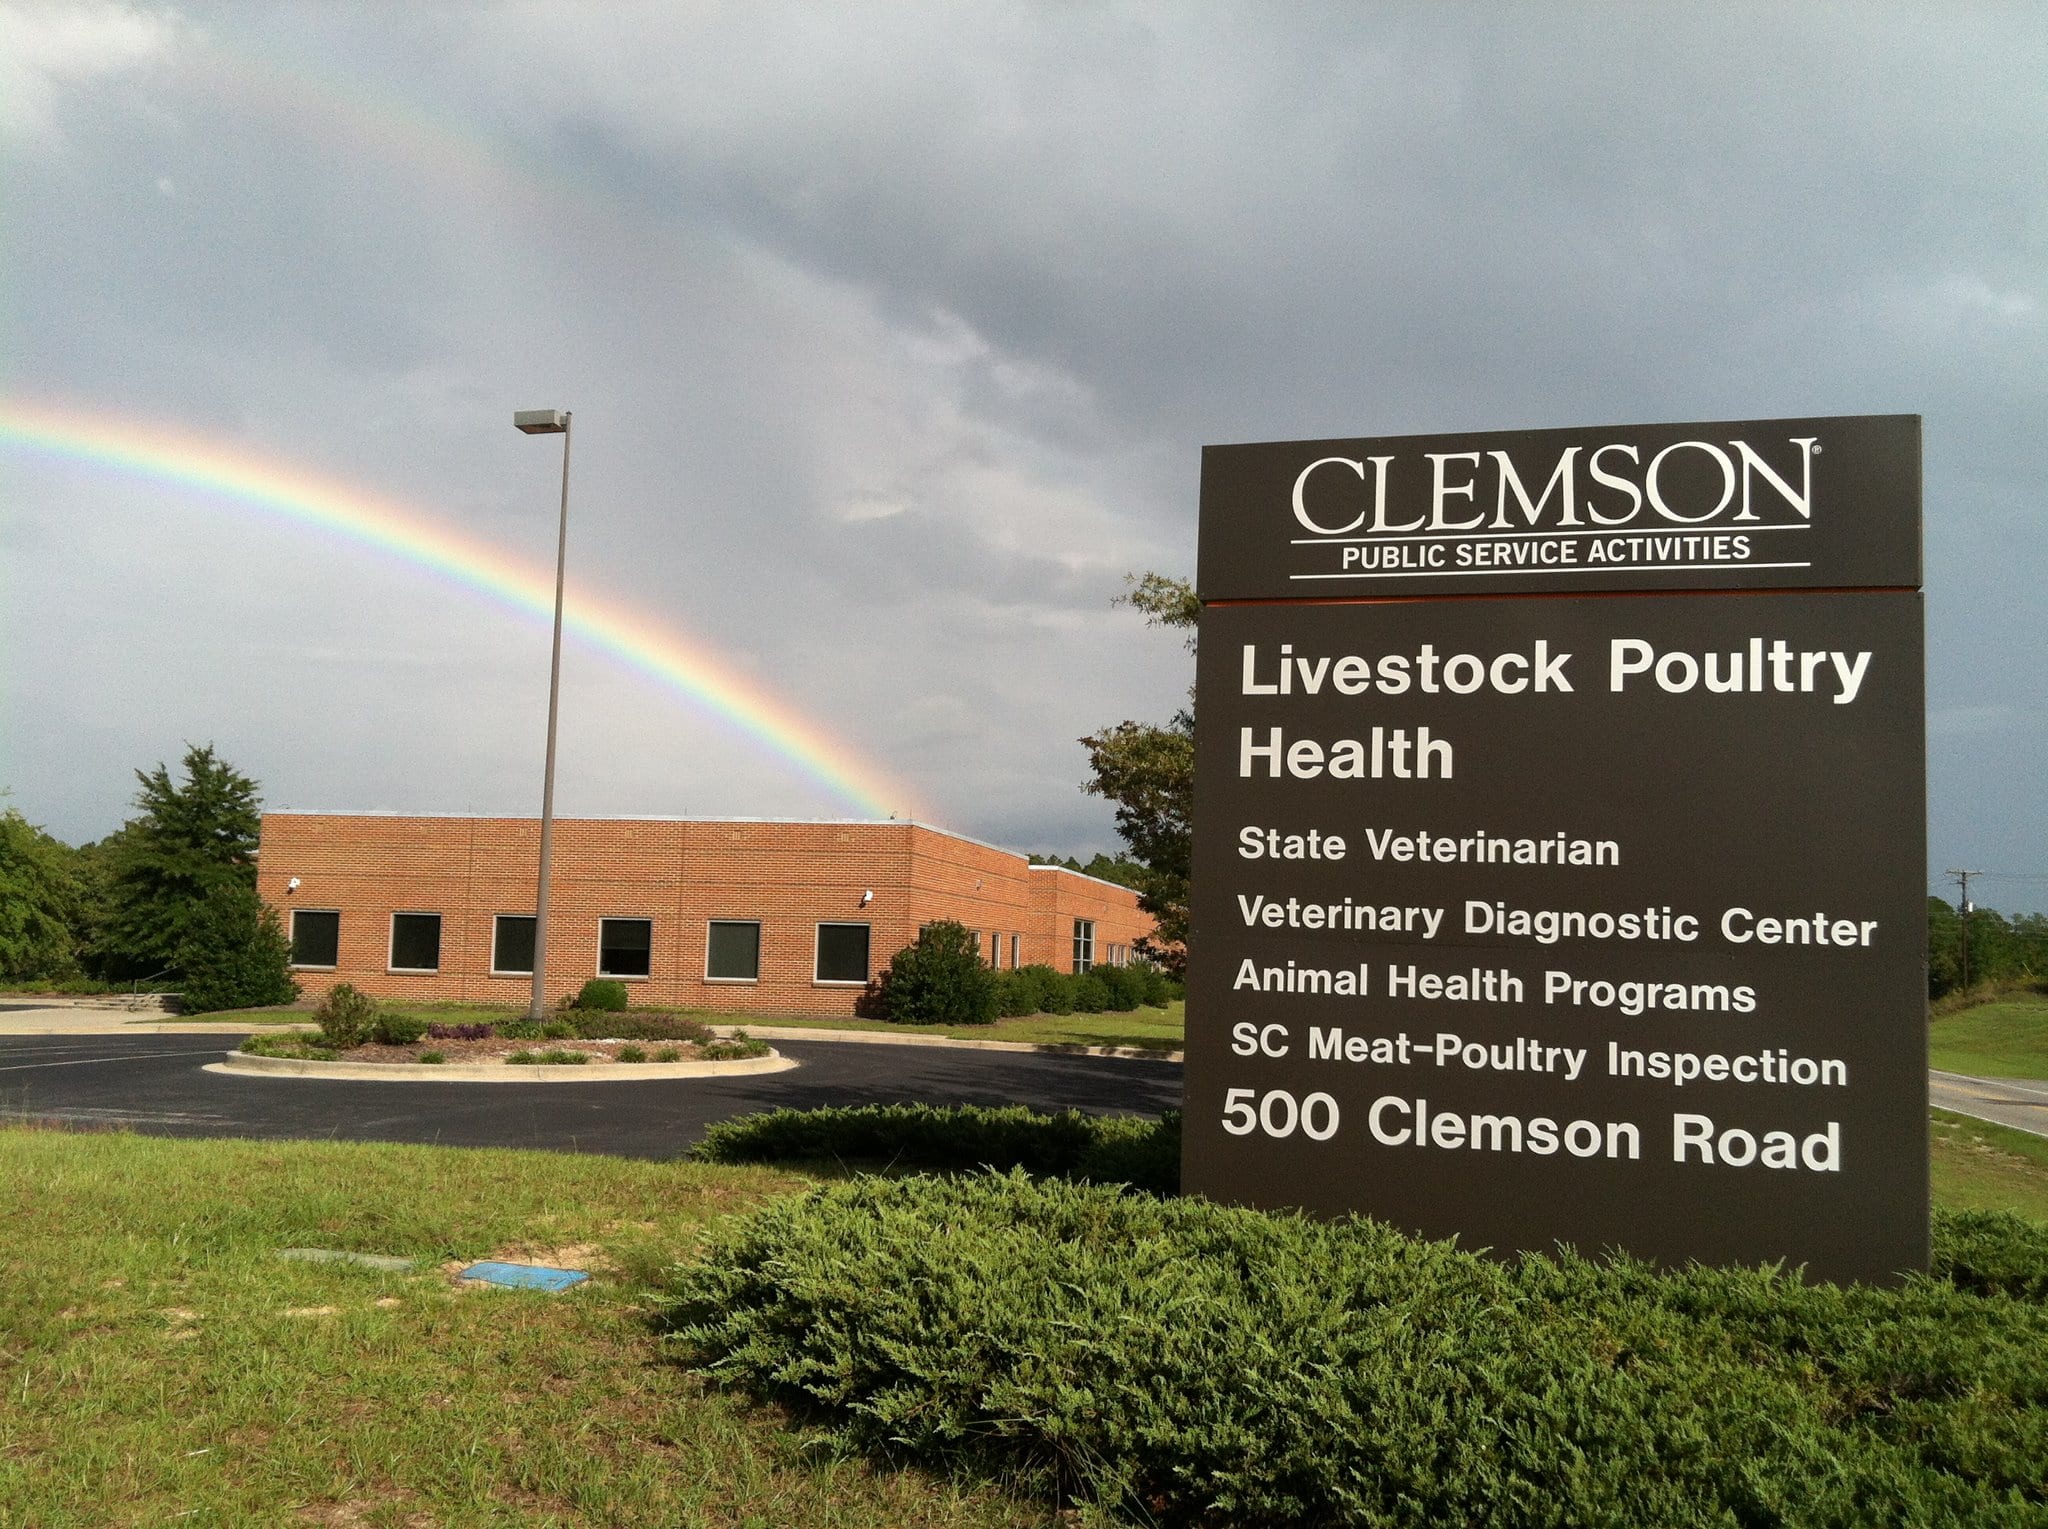 Livestock-Poultry Health Building and sign with rainbow